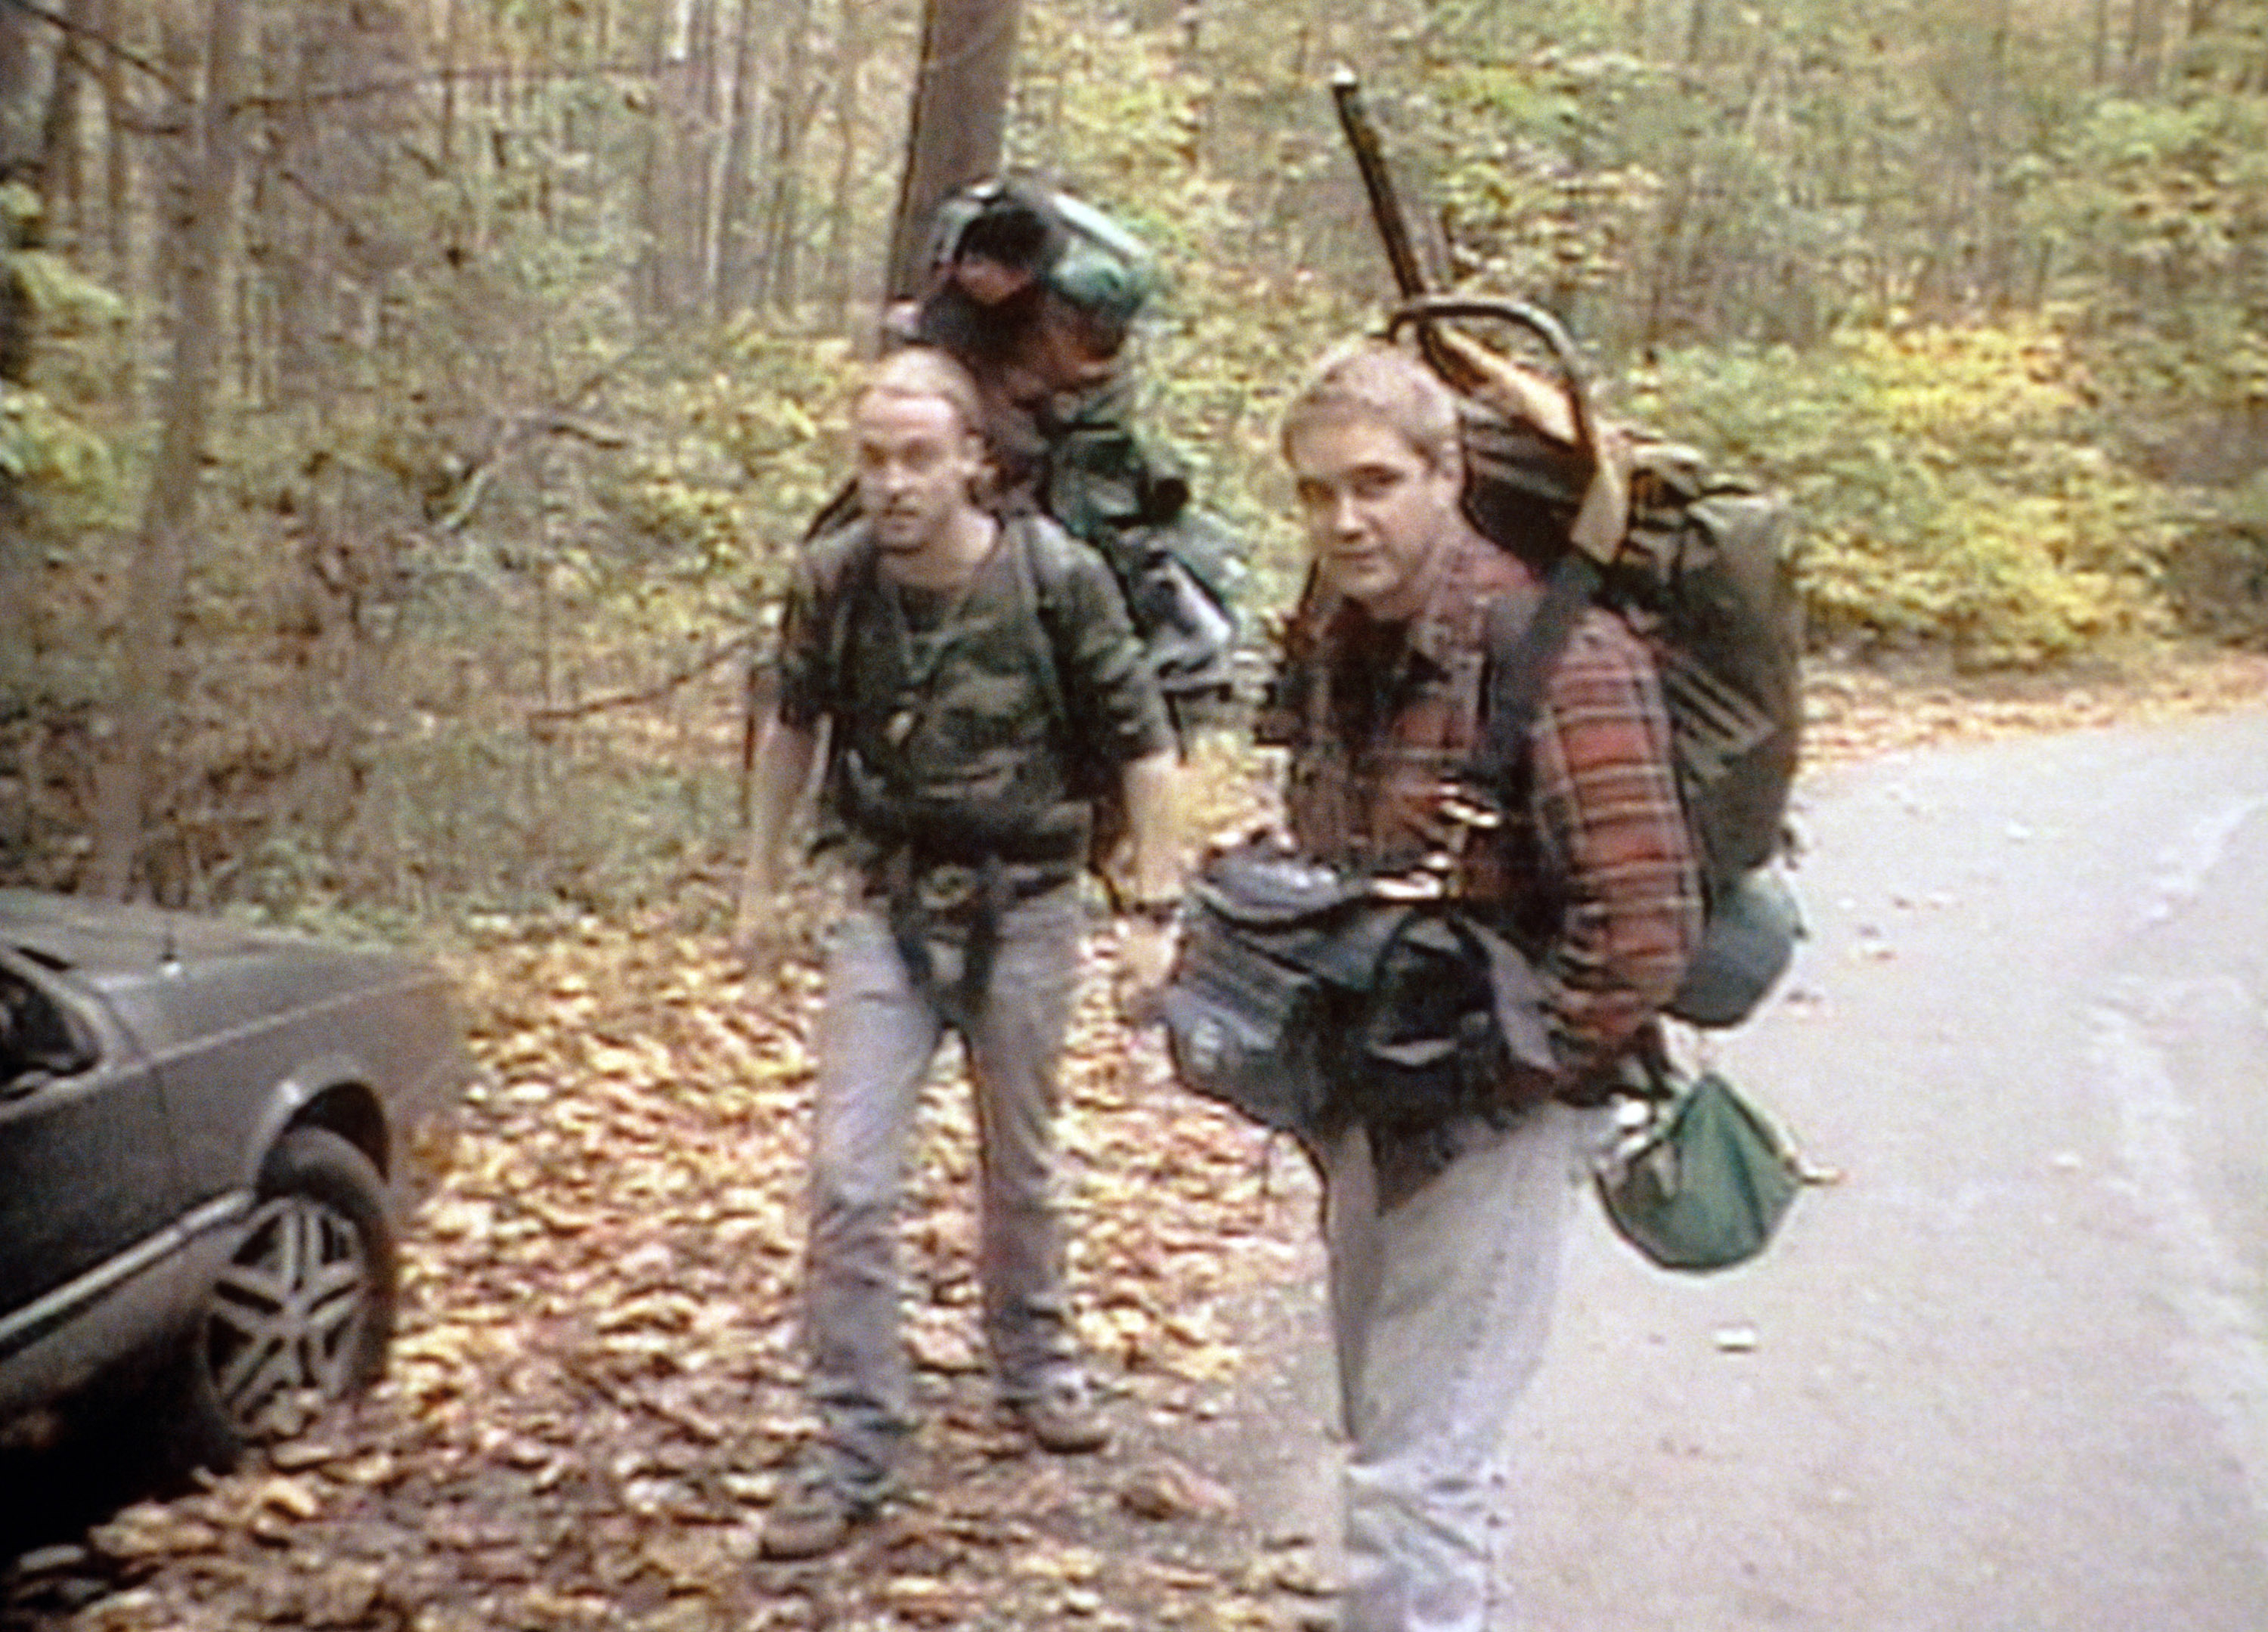 Three people with backpacks and cameras trekking on a leaf-covered road, hinting at an outdoor adventure